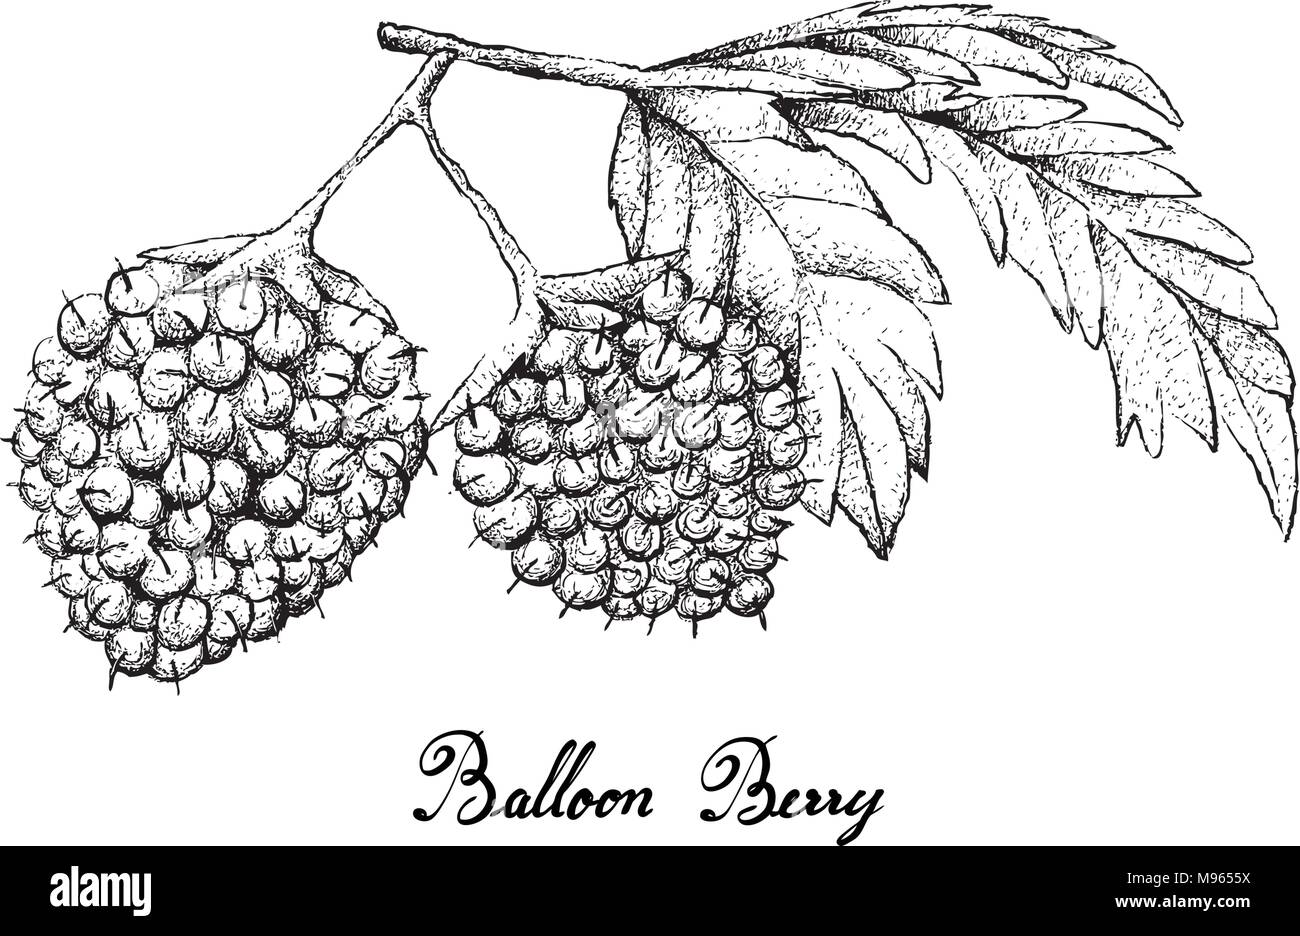 Berry Fruit, Illustration Hand Drawn Sketch of Fresh Balloon Berries or Rubus Illecebrosus Fruits Isolated on White Background. Stock Vector